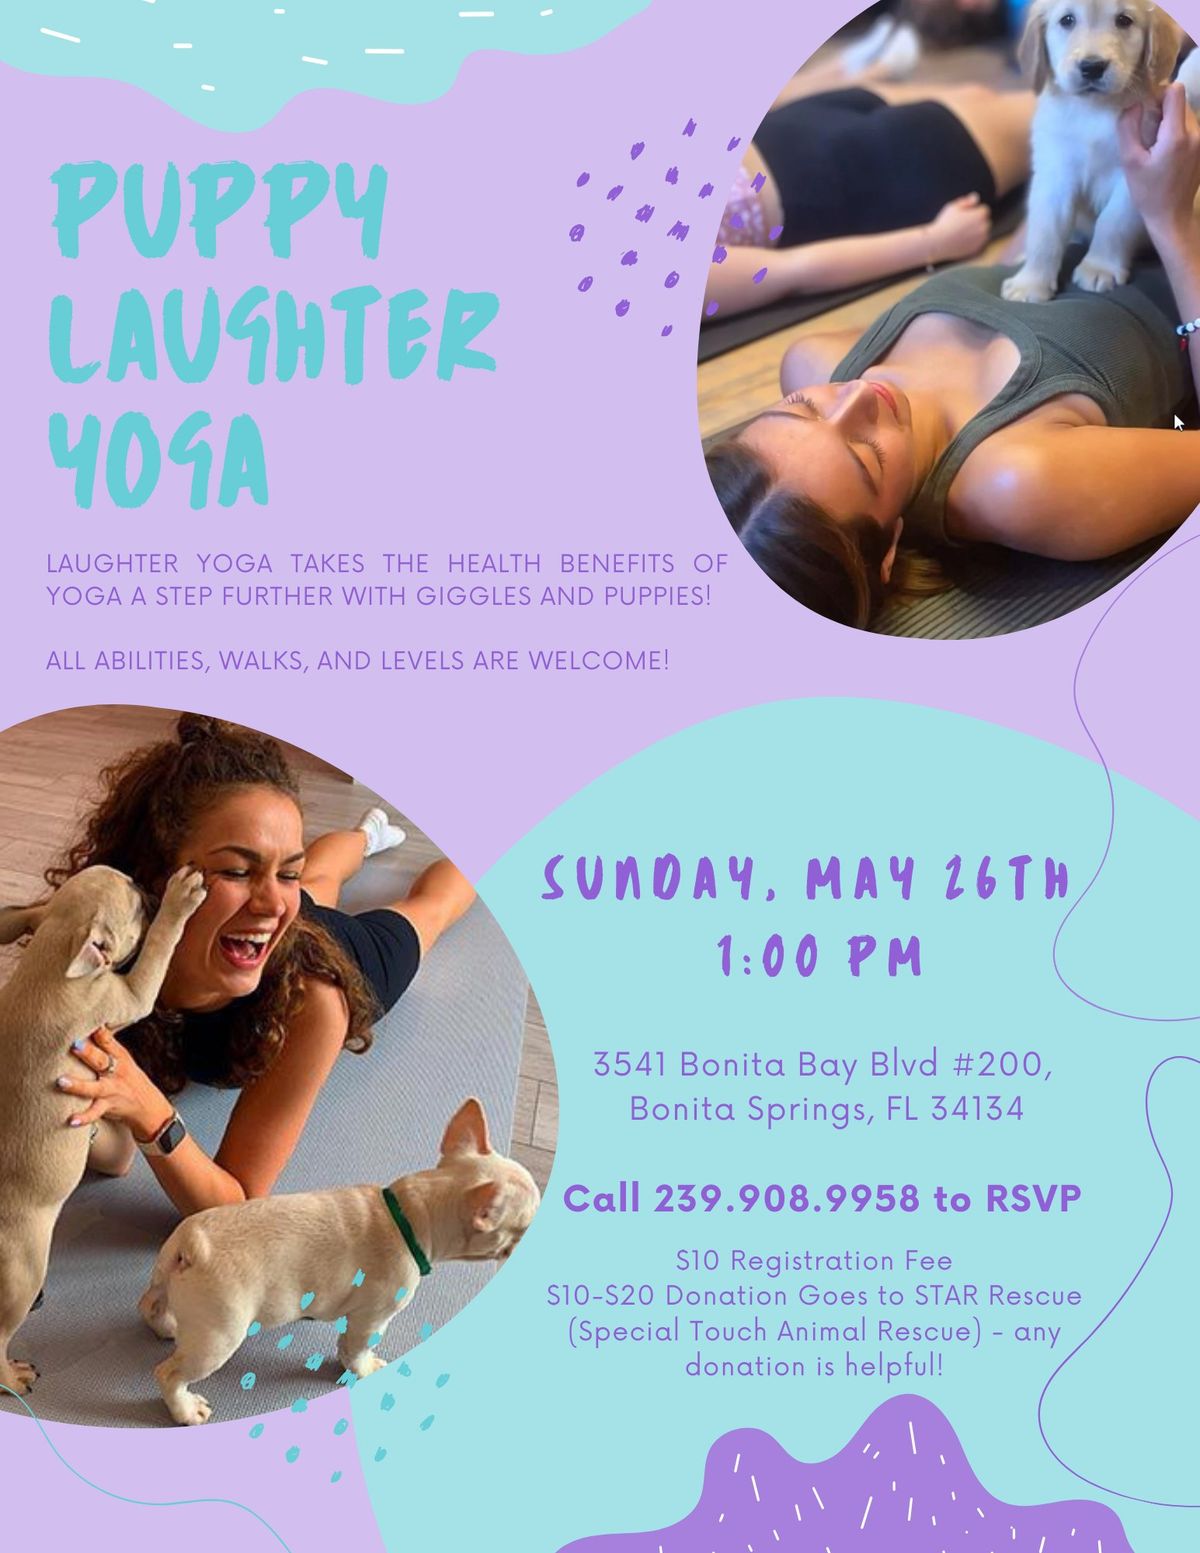 Puppy Laughter Yoga